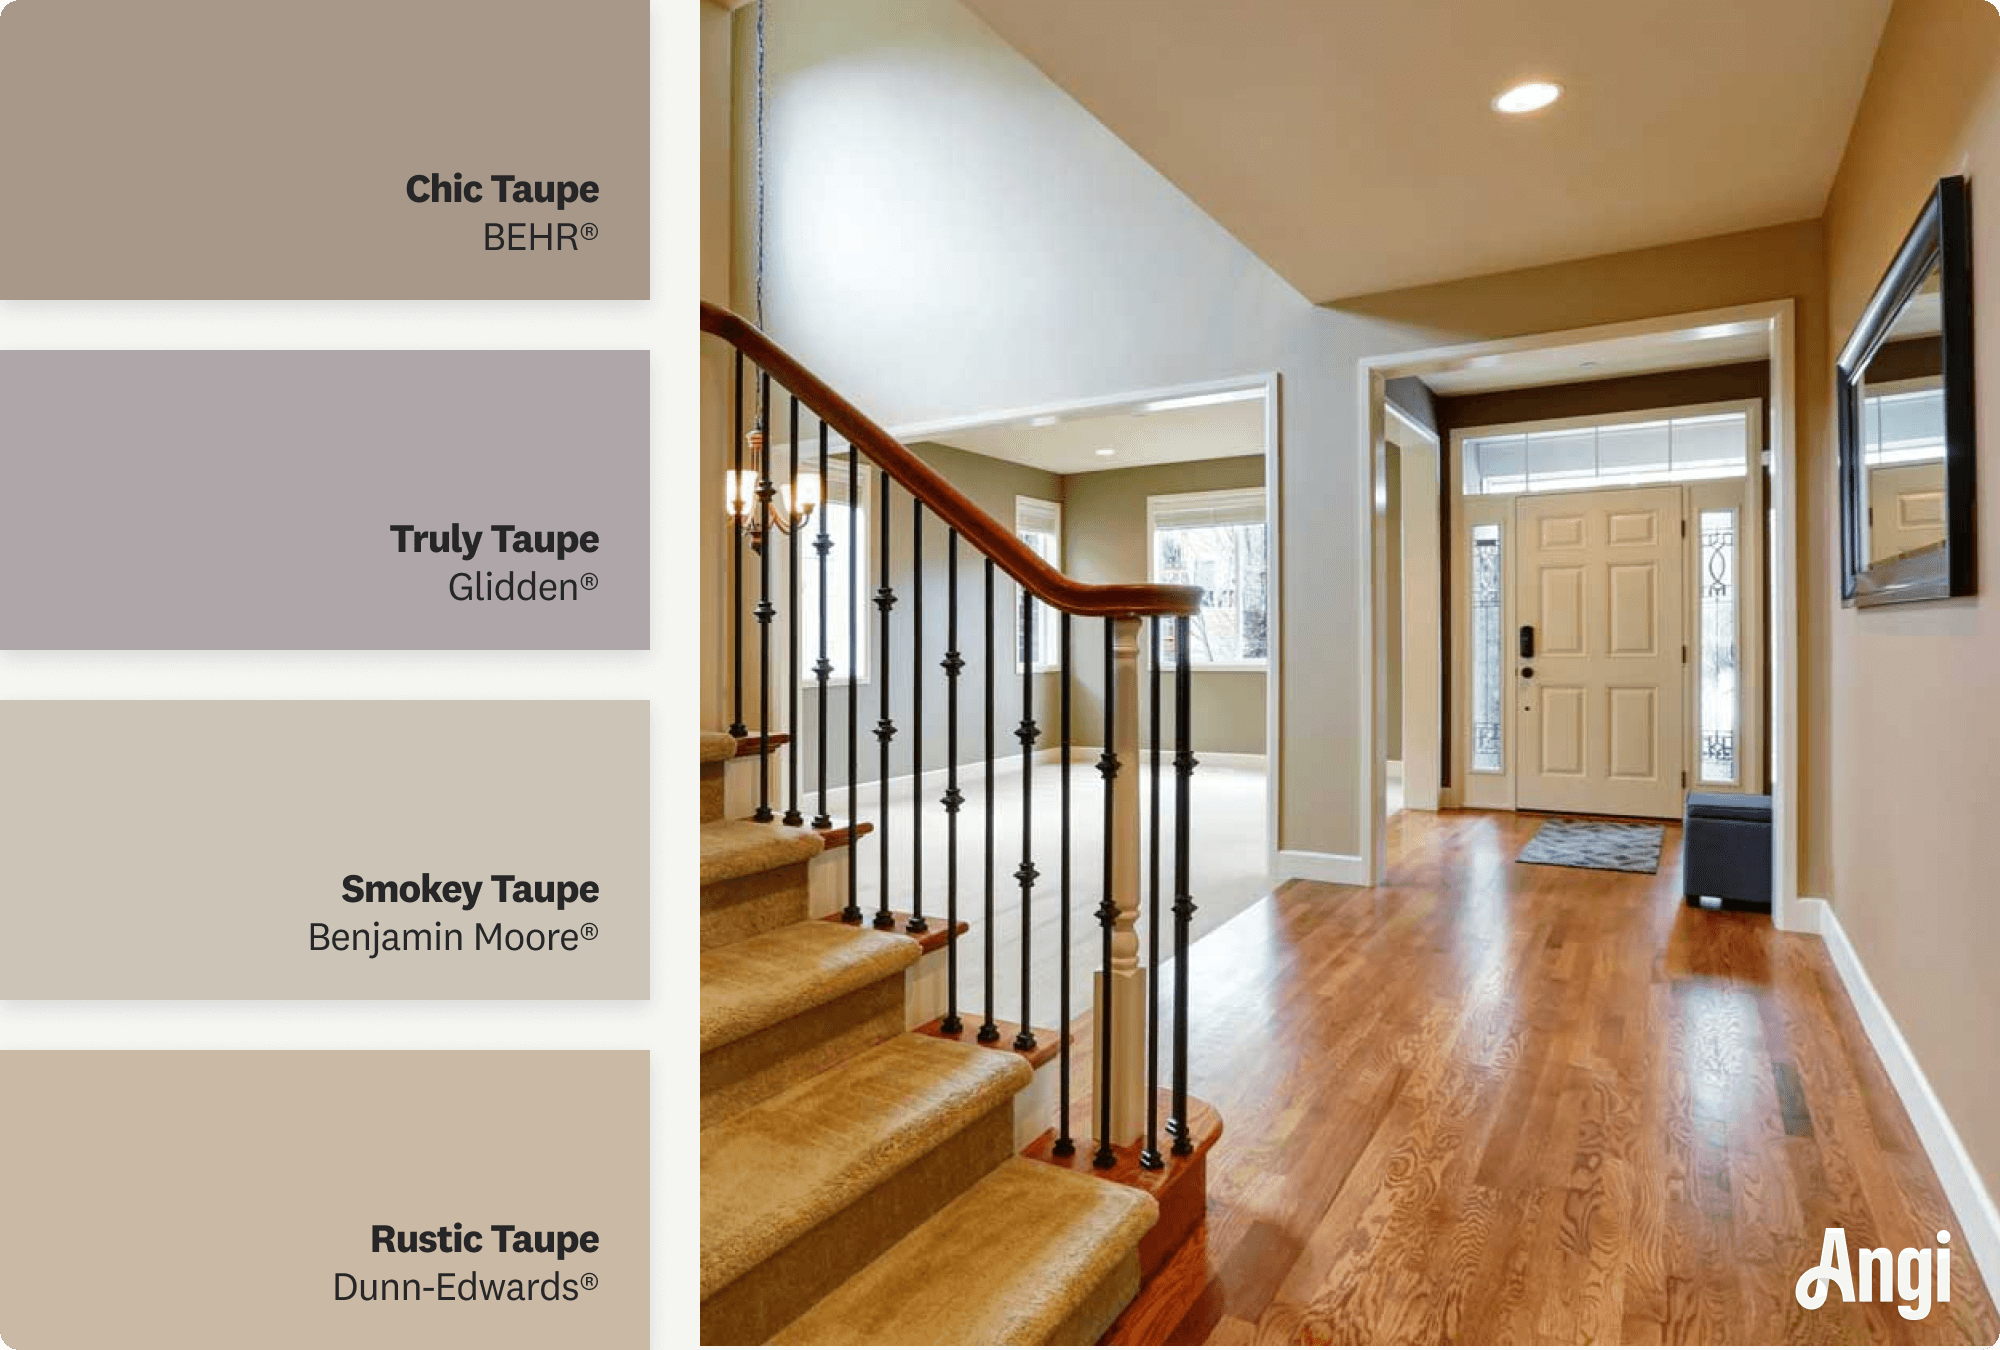 A taupe entrance hall with wooden floors, including different tones of taupe paint